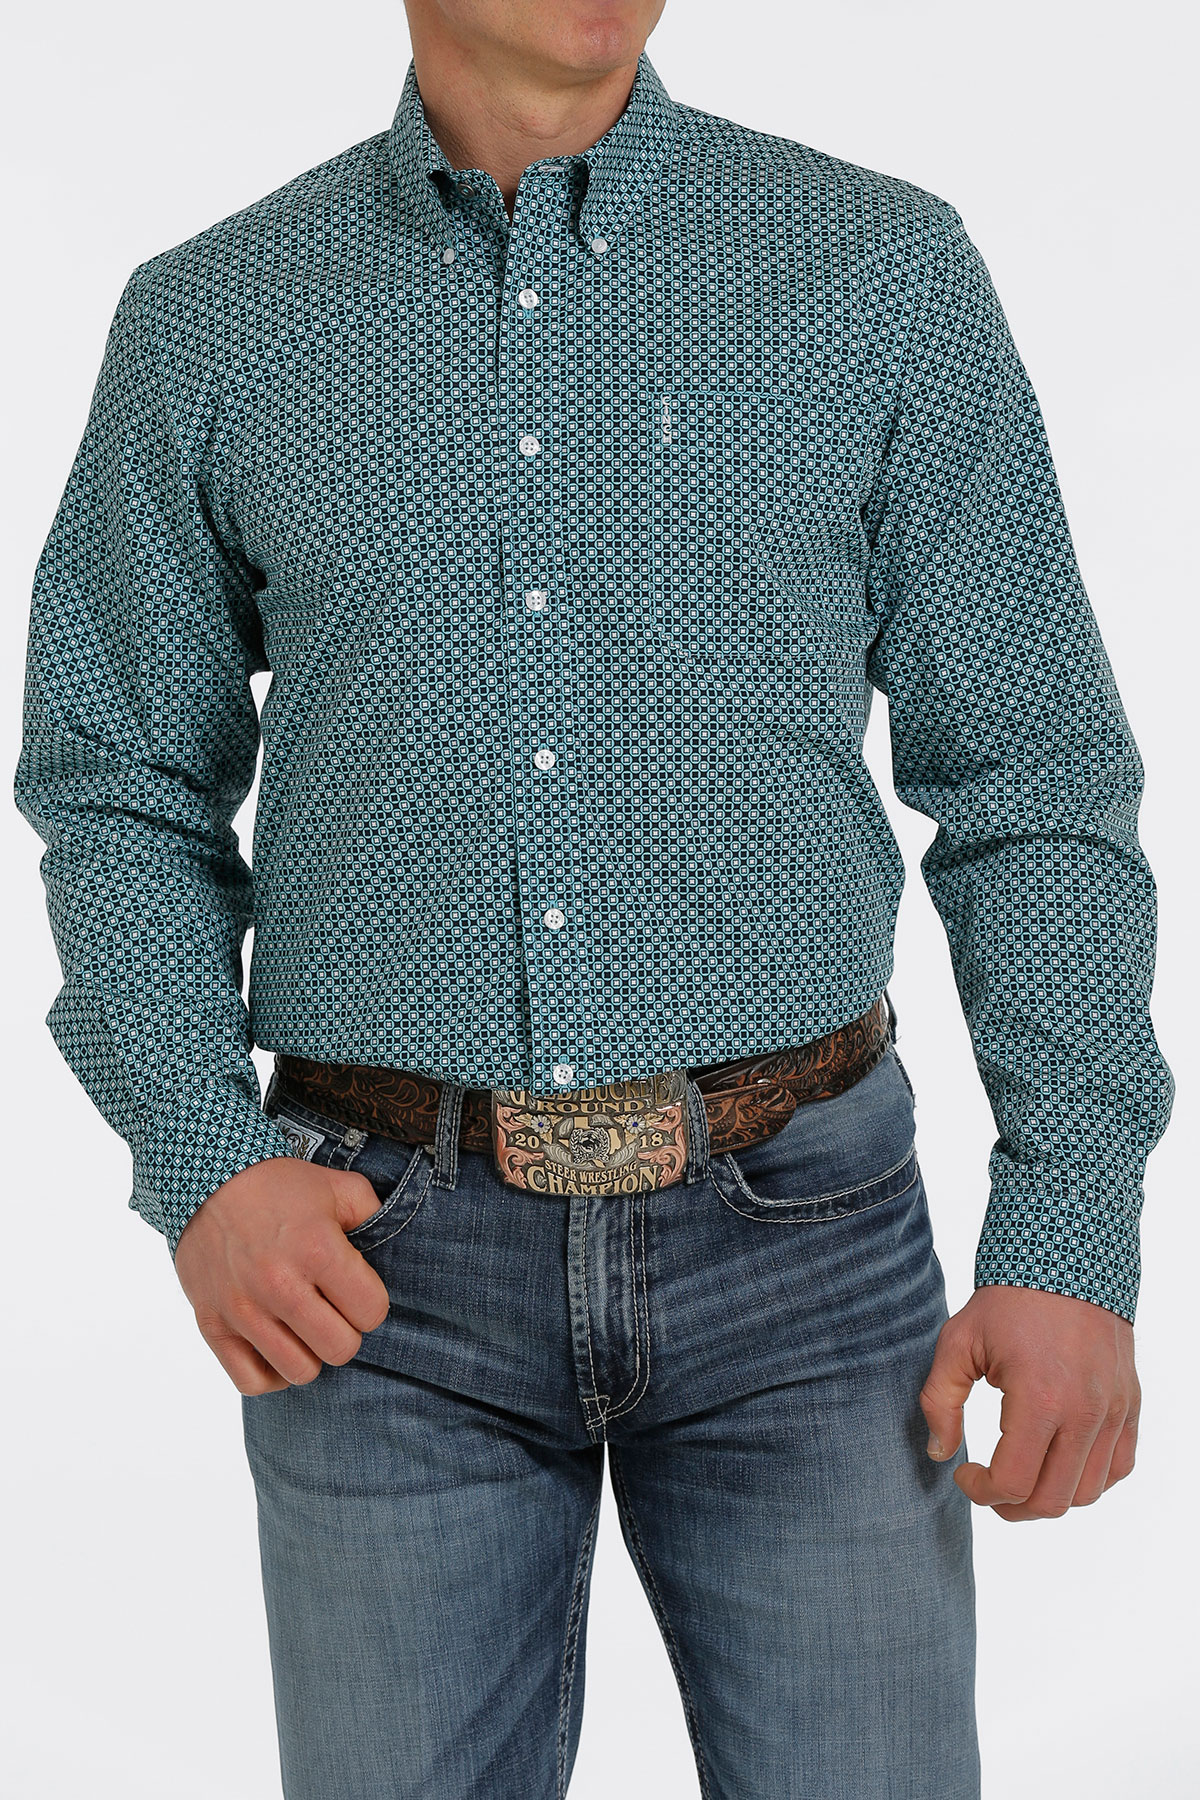 Men's Cinch Modern Fit Button Down Western Shirt - Turquoise and Navy